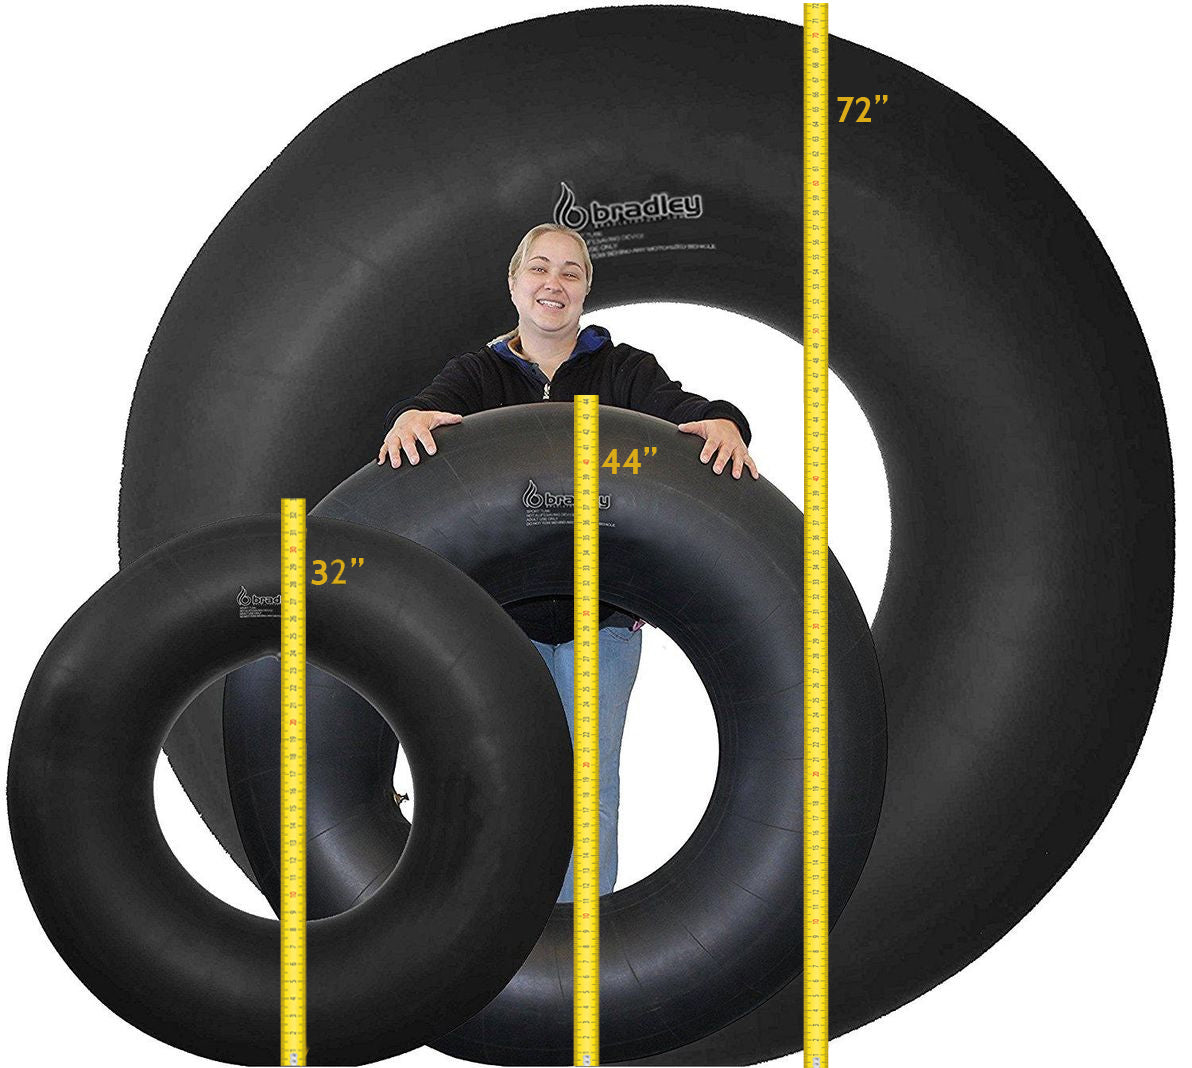 Bradley Heavy Duty Rubber Inner Tube for Floating River | Snow Tube; Heavy duty pool float for kids; pool tube closing; large lake floats for kids (32 inch inflated)